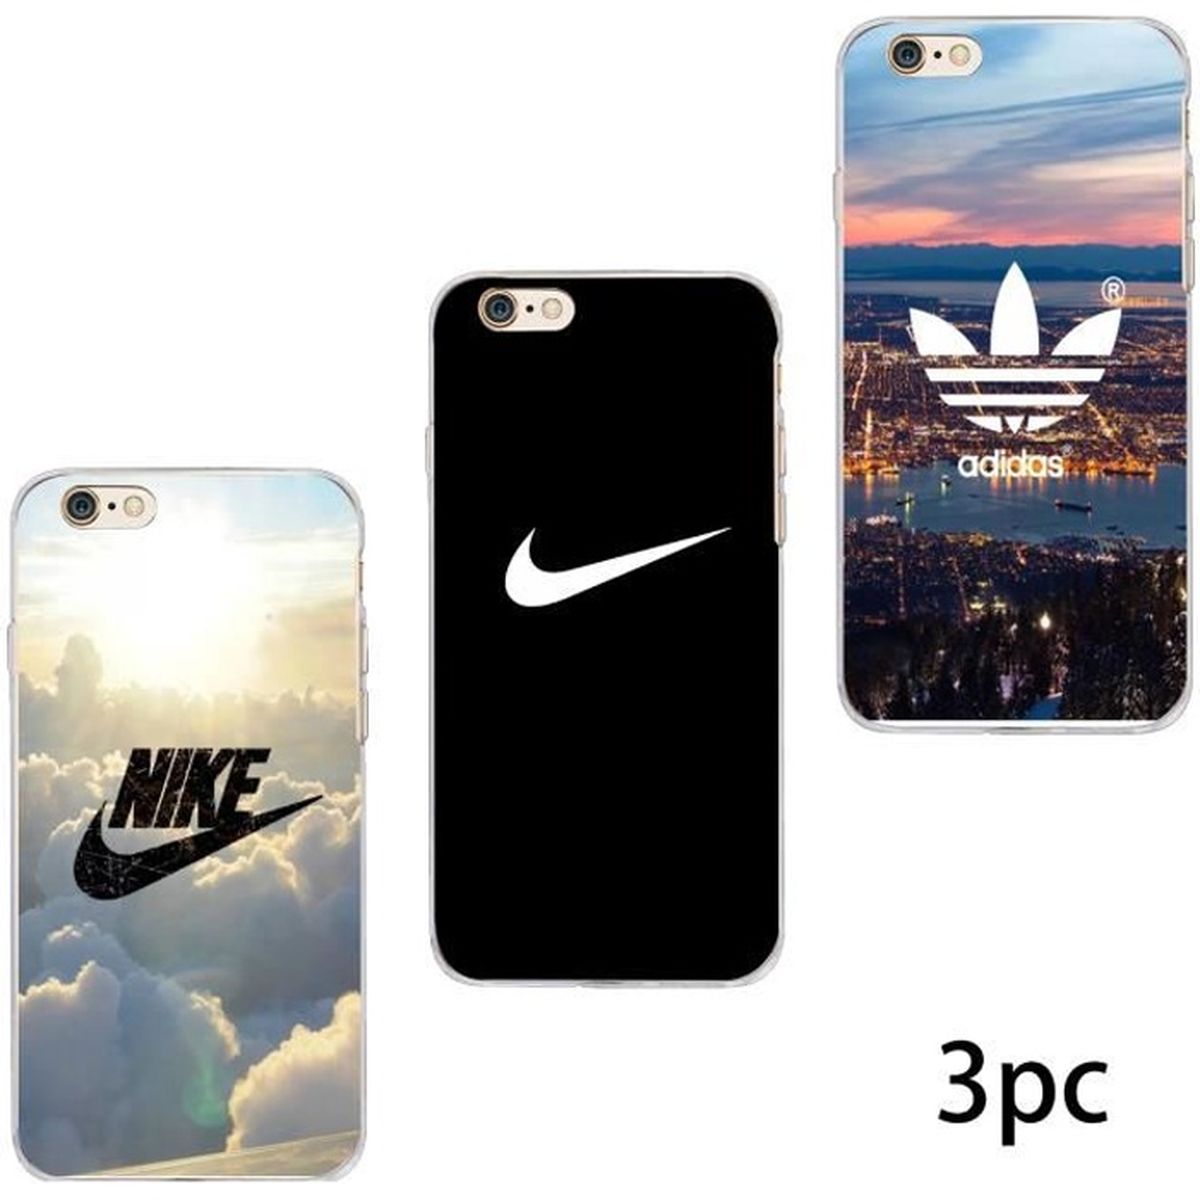 coque iphone 7 pour iphone 6s